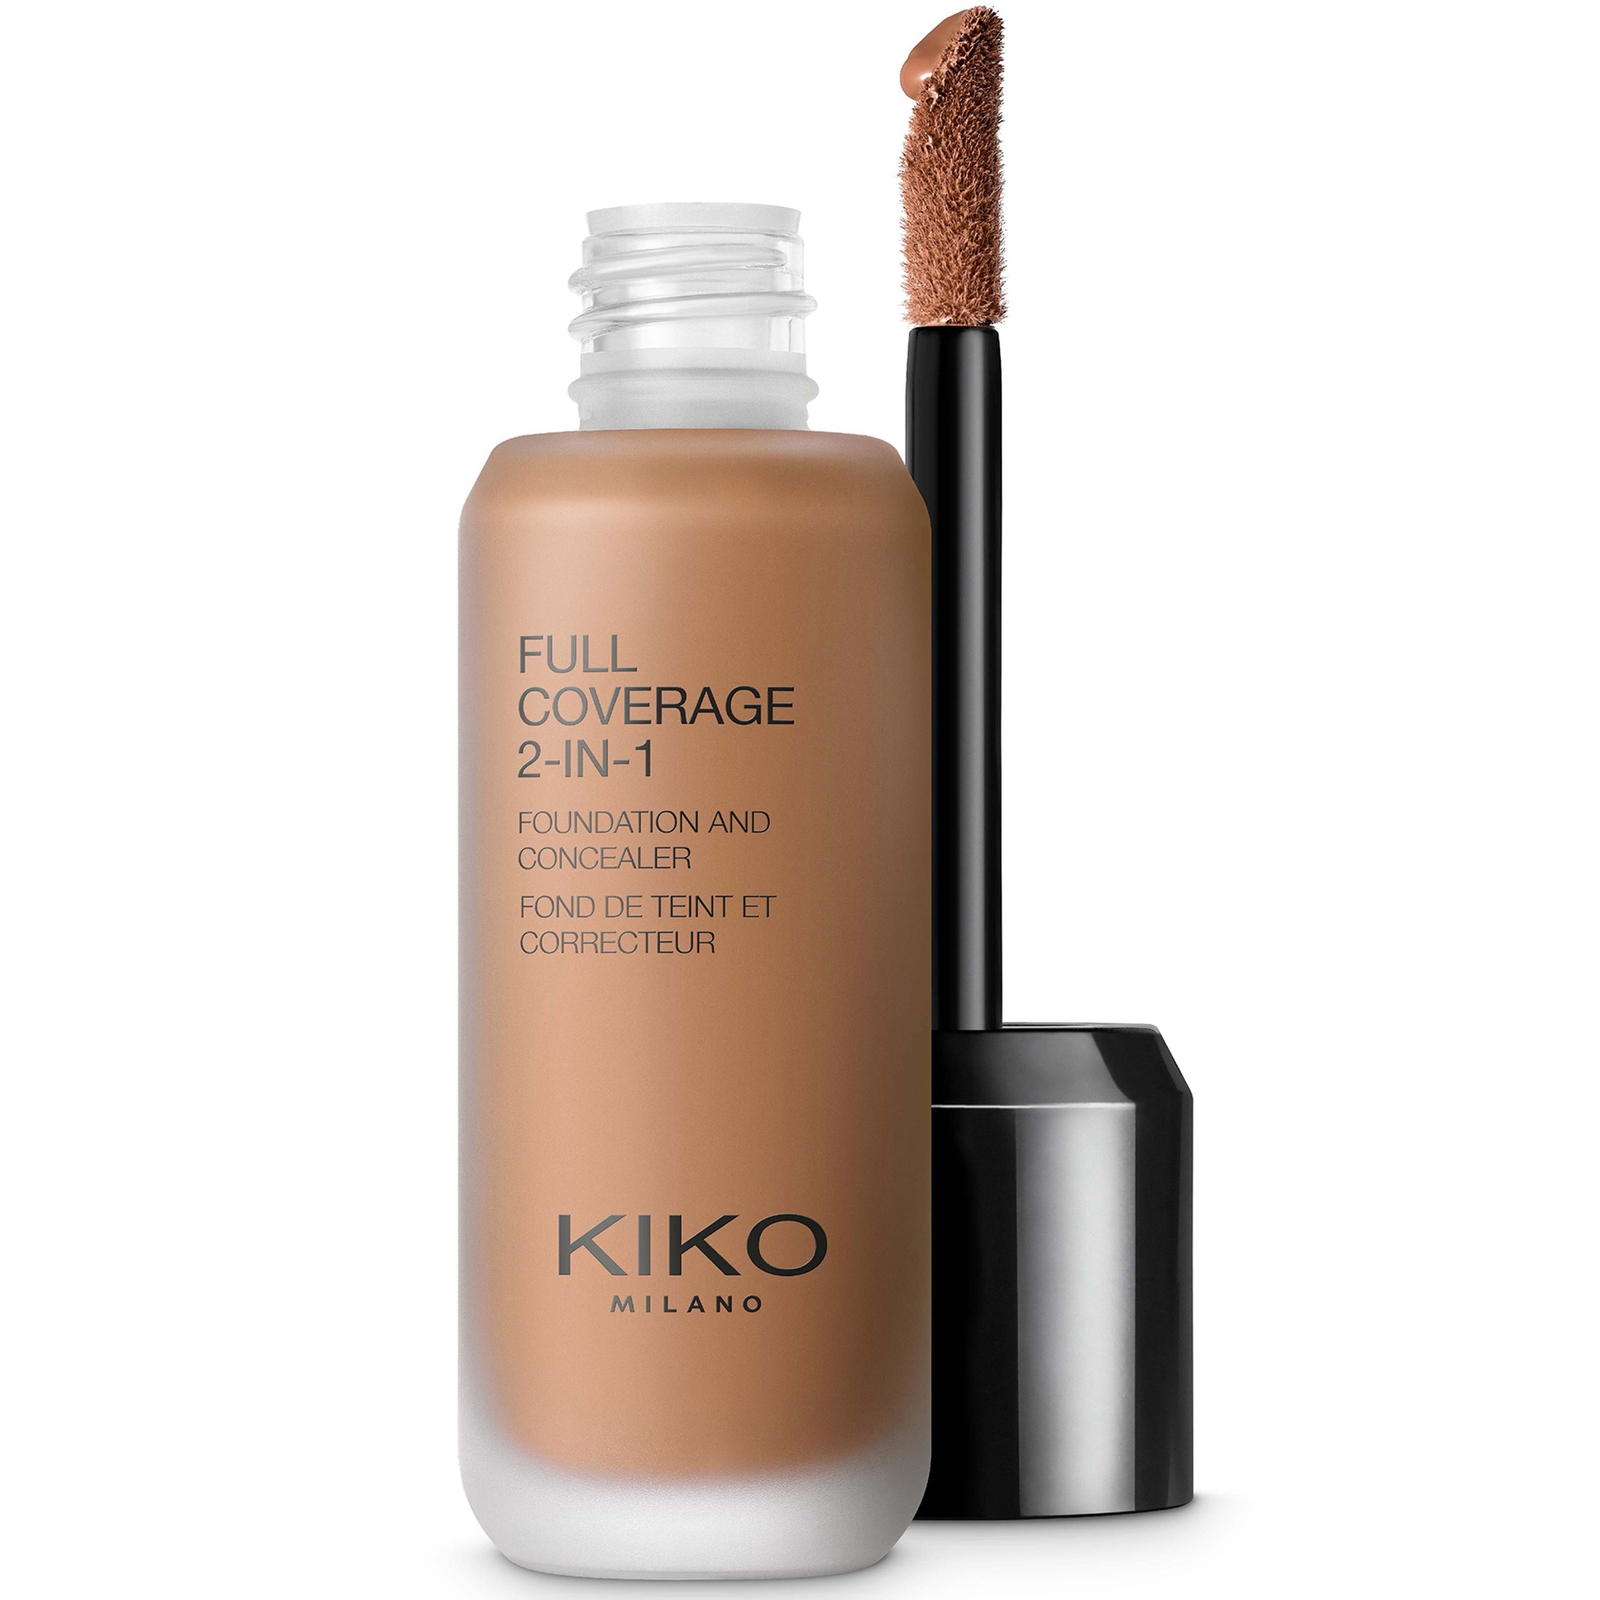 Image of KIKO Milano Full Coverage 2-in-1 Foundation and Concealer 25ml (Various Shades) - 125 Neutral